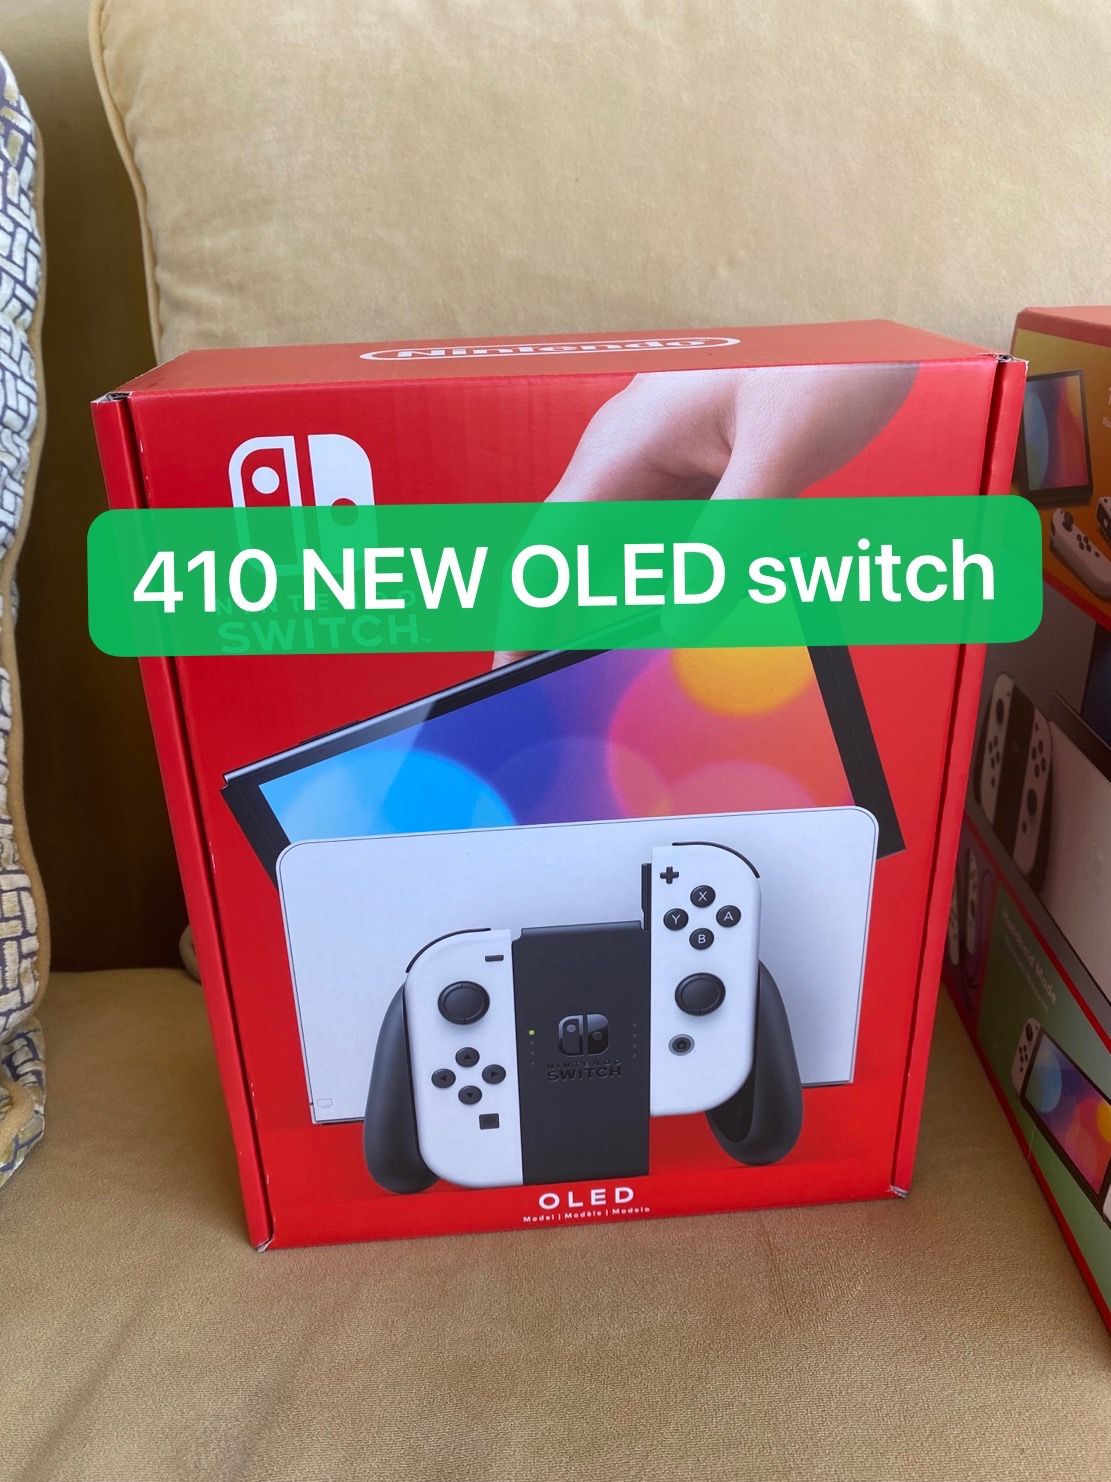 Brand new Nintendo OLED switch white color